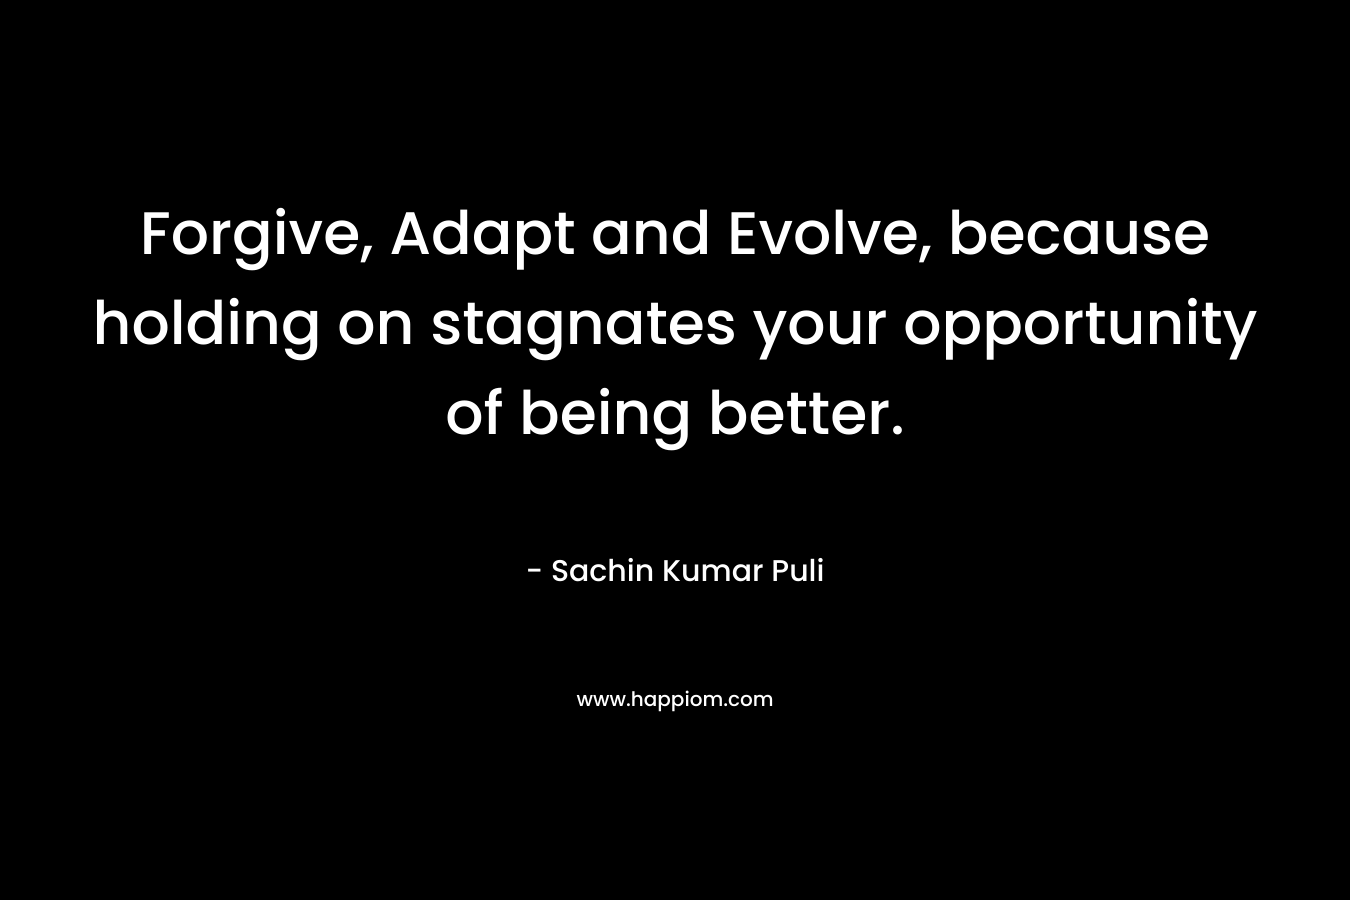 Forgive, Adapt and Evolve, because holding on stagnates your opportunity of being better. – Sachin Kumar Puli